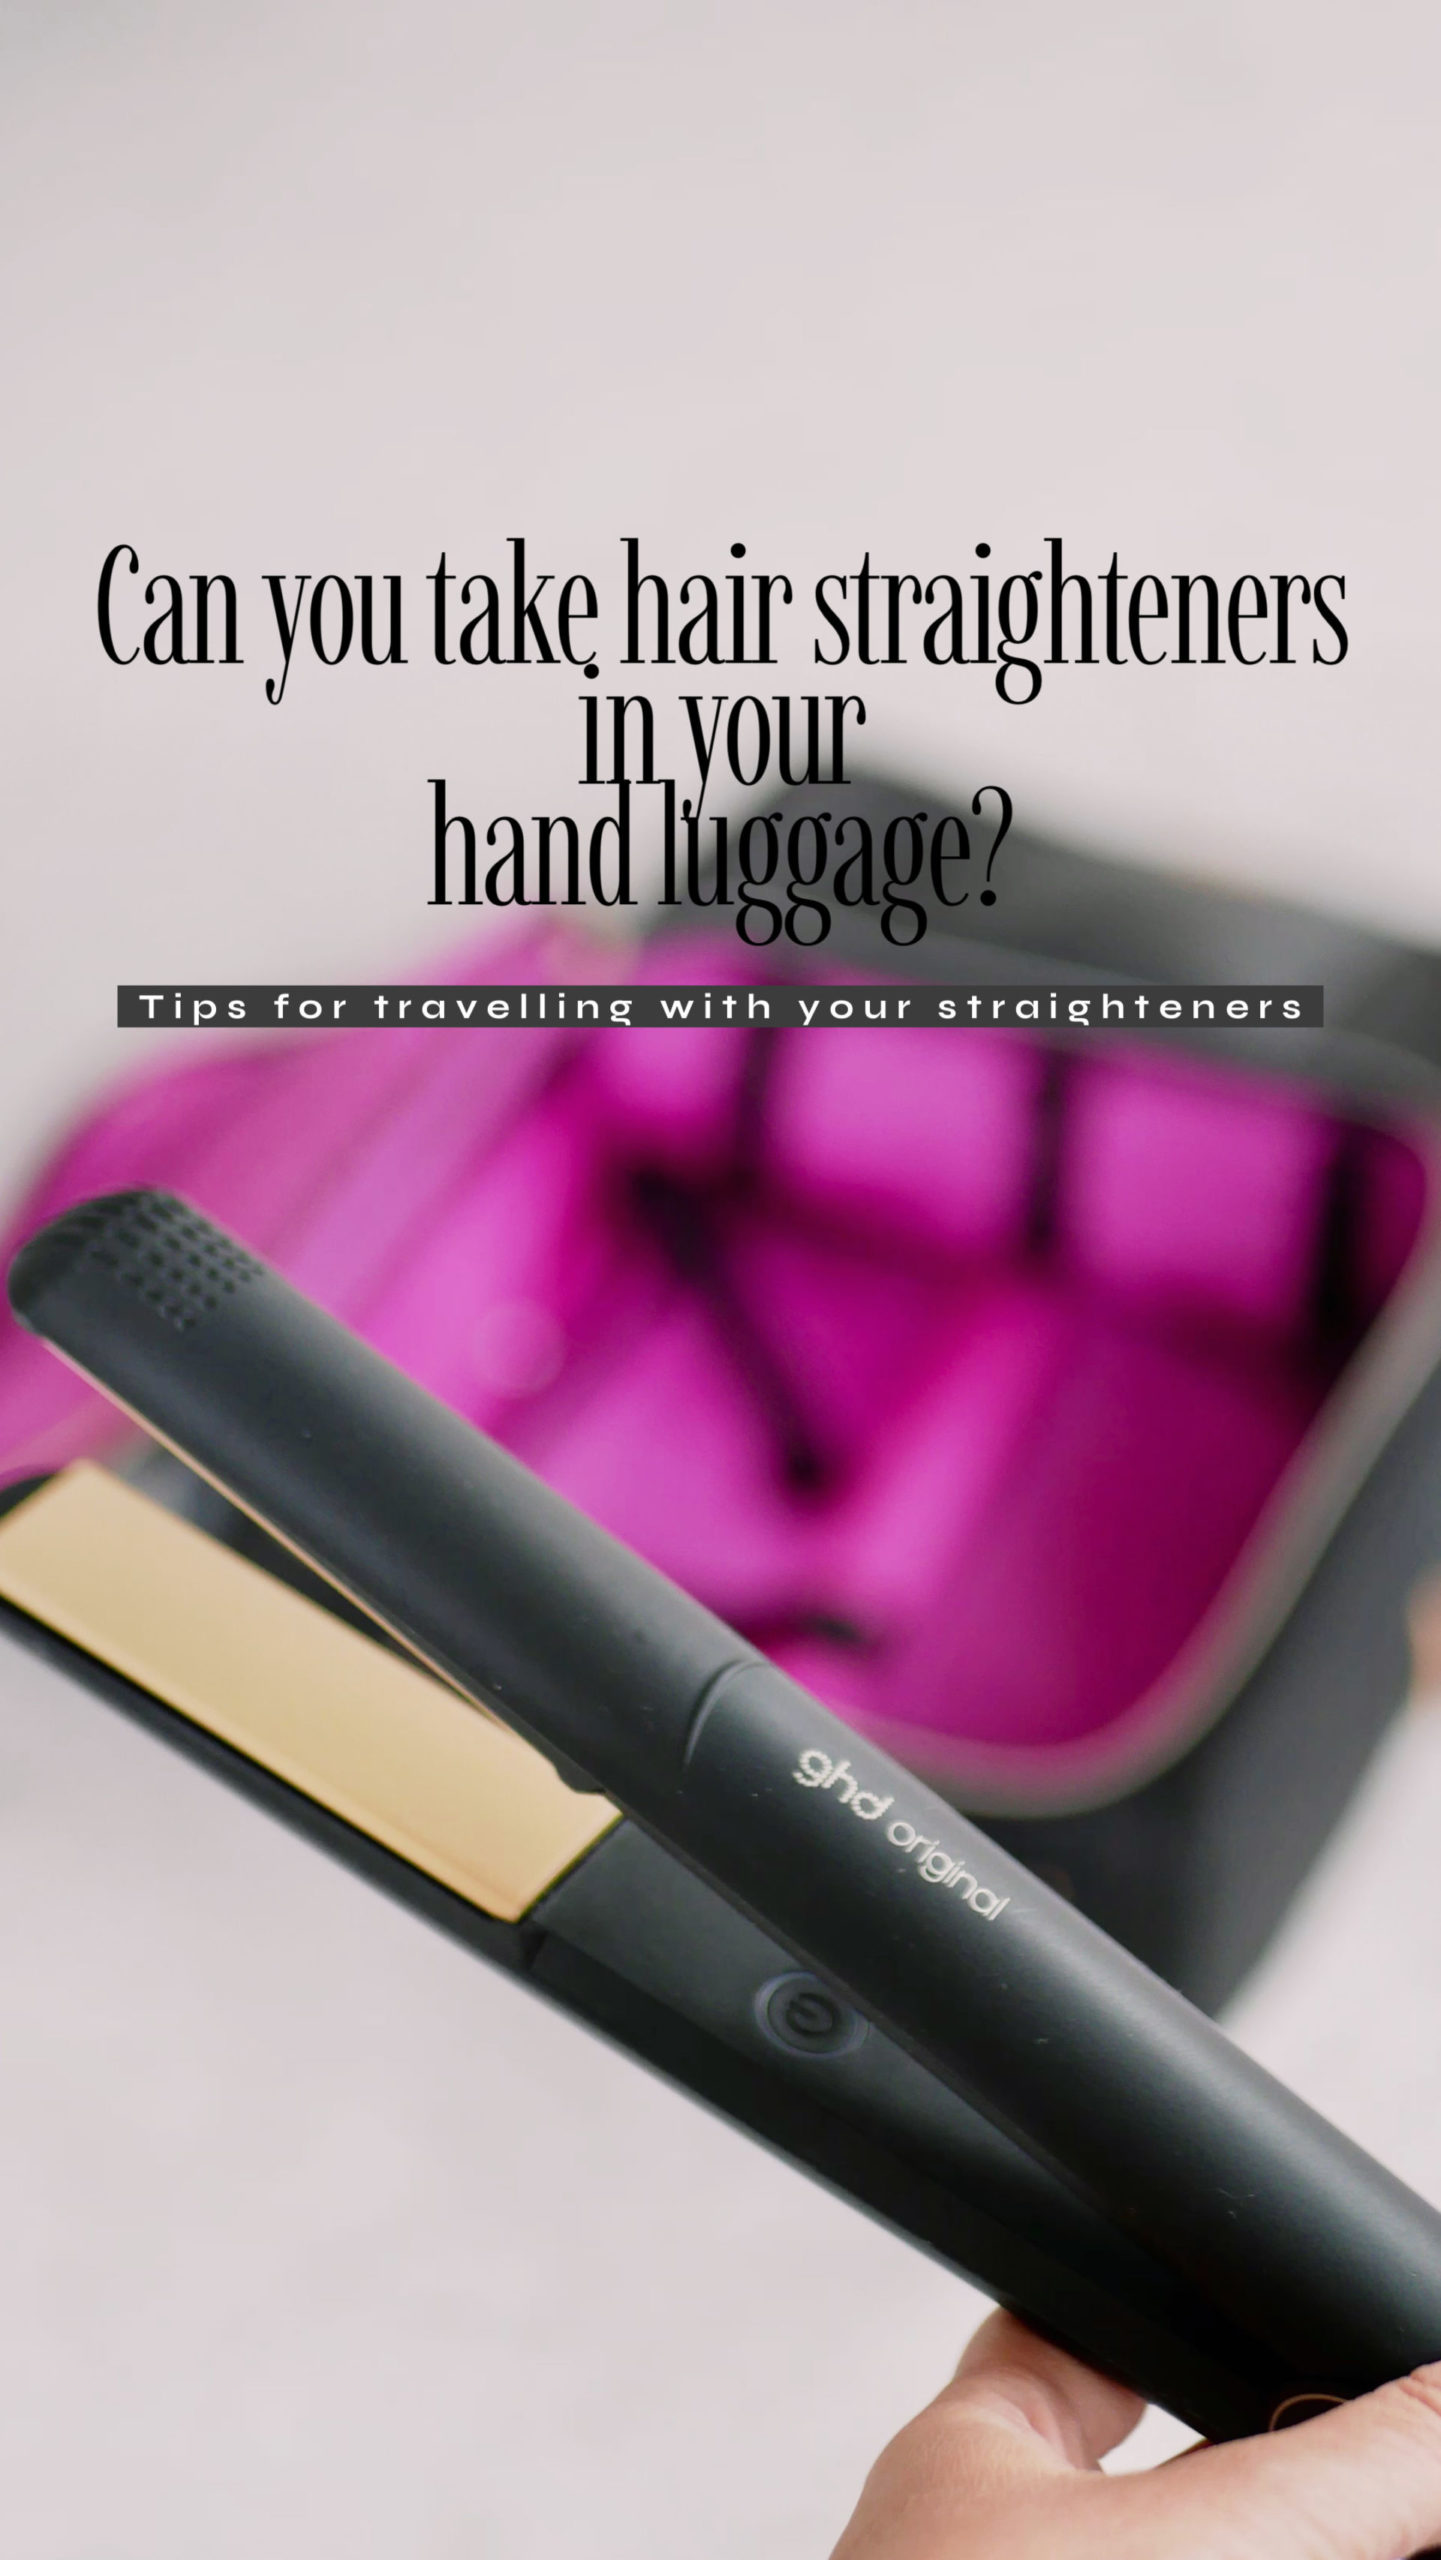 Can you take hair straighteners on a plane in hand luggage?